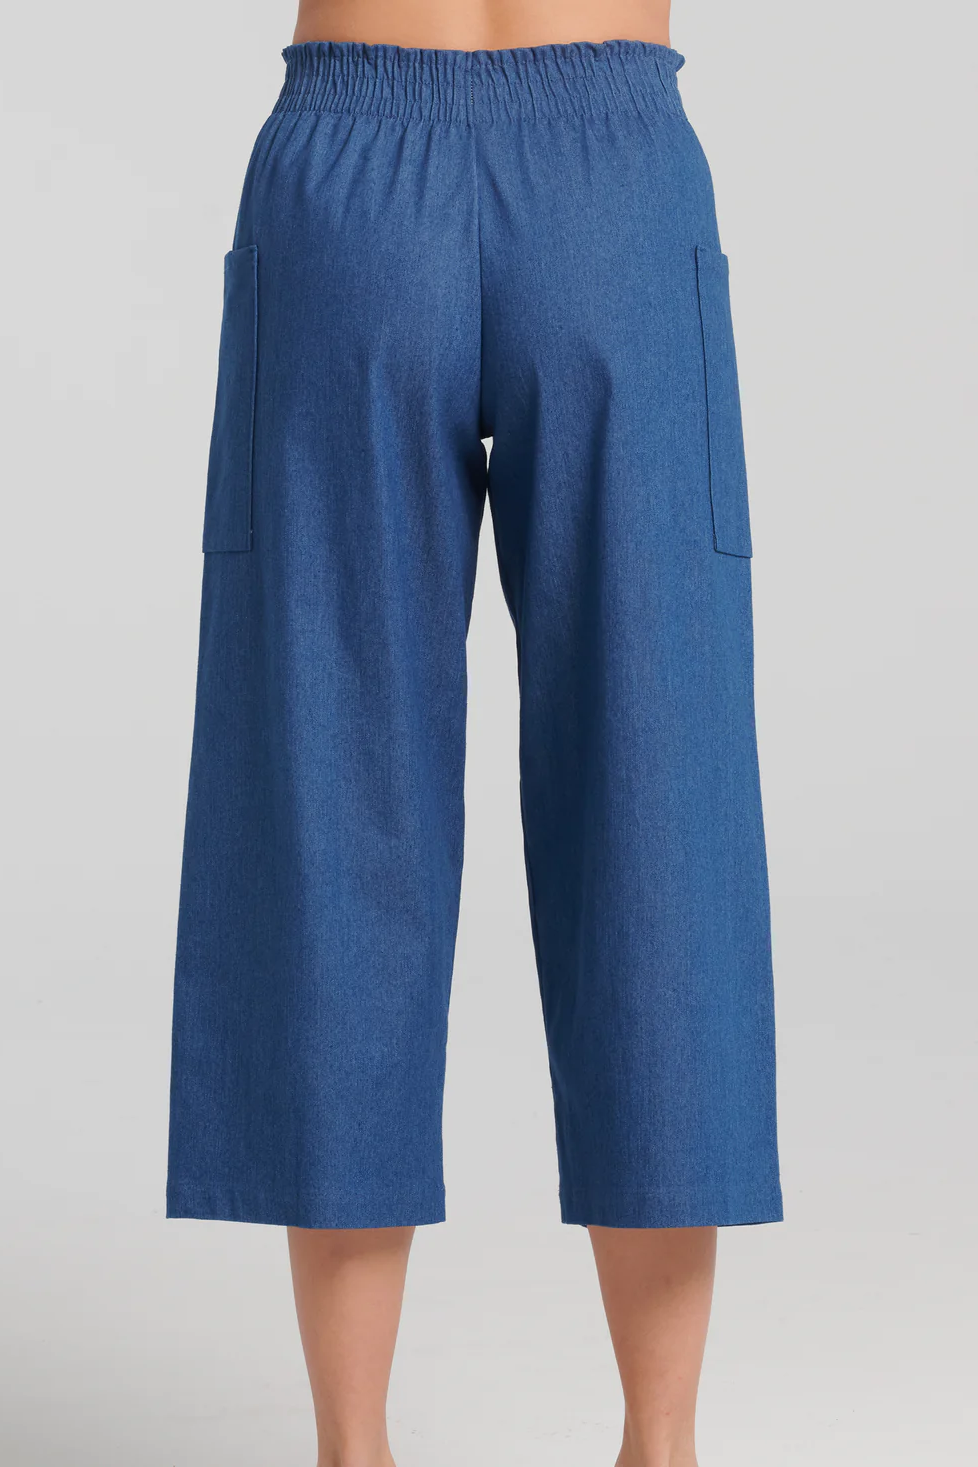 Anona Pants by Kollontai, Blue, back view, lightweight denim, cropped length, elastic waist, side pouch pockets, sizes XS to XXL, made in Montreal 